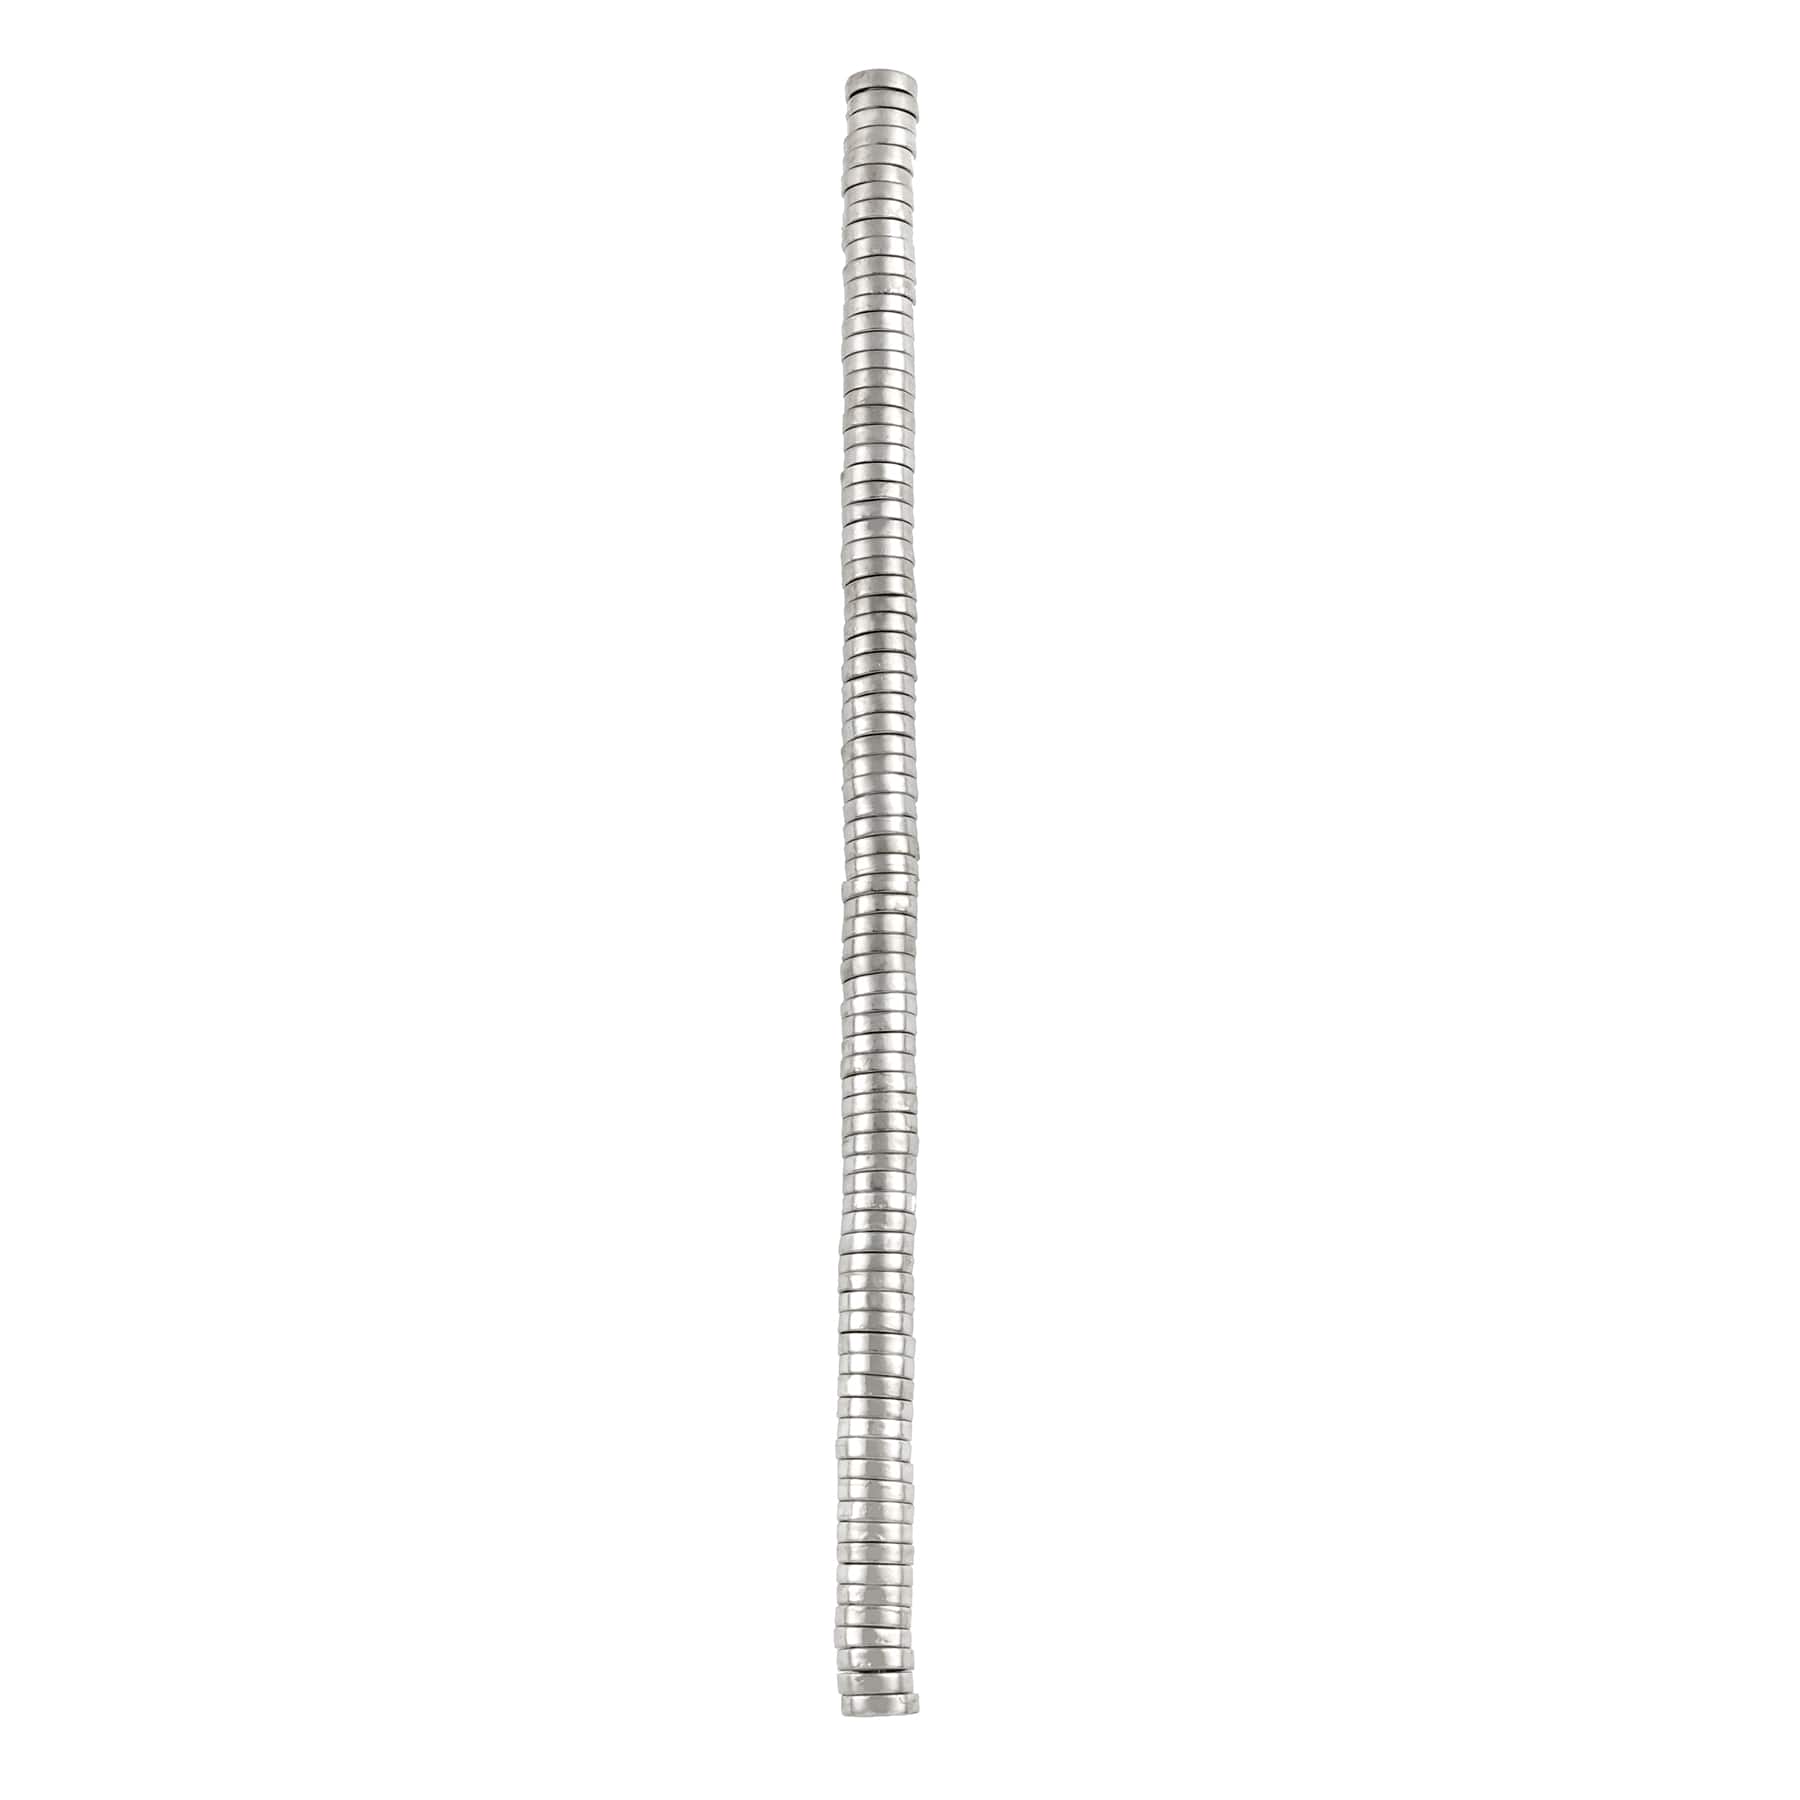 12 Pack: Rhodium Large Hole Metal Disc Spacer Beads by Bead Landing™